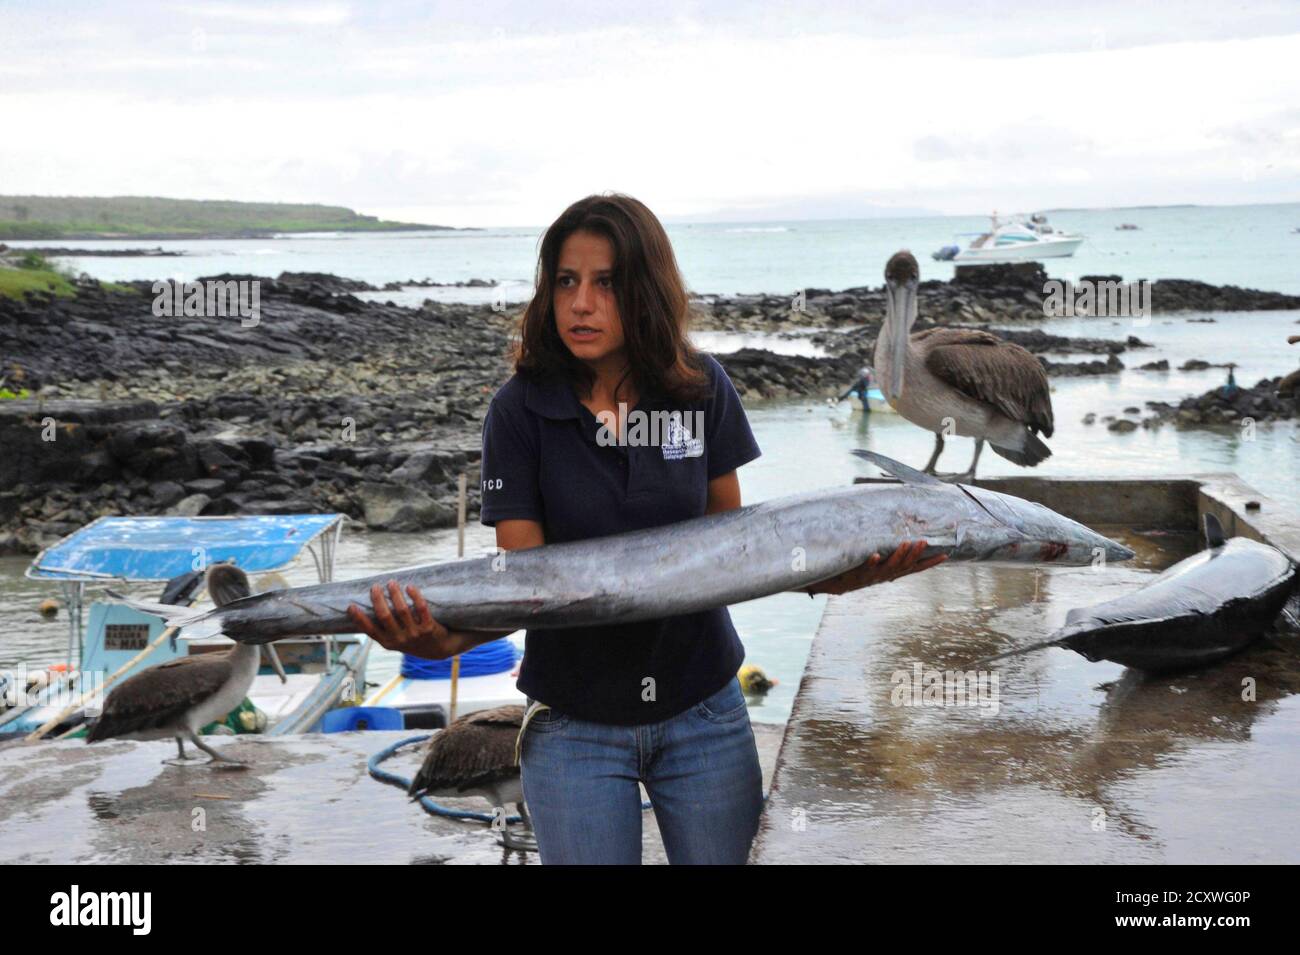 Marine biologist Isabel Haro holds a guajo (Acanthocybium Solandri) fish, also known as wahoo, as she carries out research on its population control in Santa Cruz May 17, 2012. REUTERS/Guillermo Granja (ECUADOR - Tags: ENVIRONMENT) Stock Photo